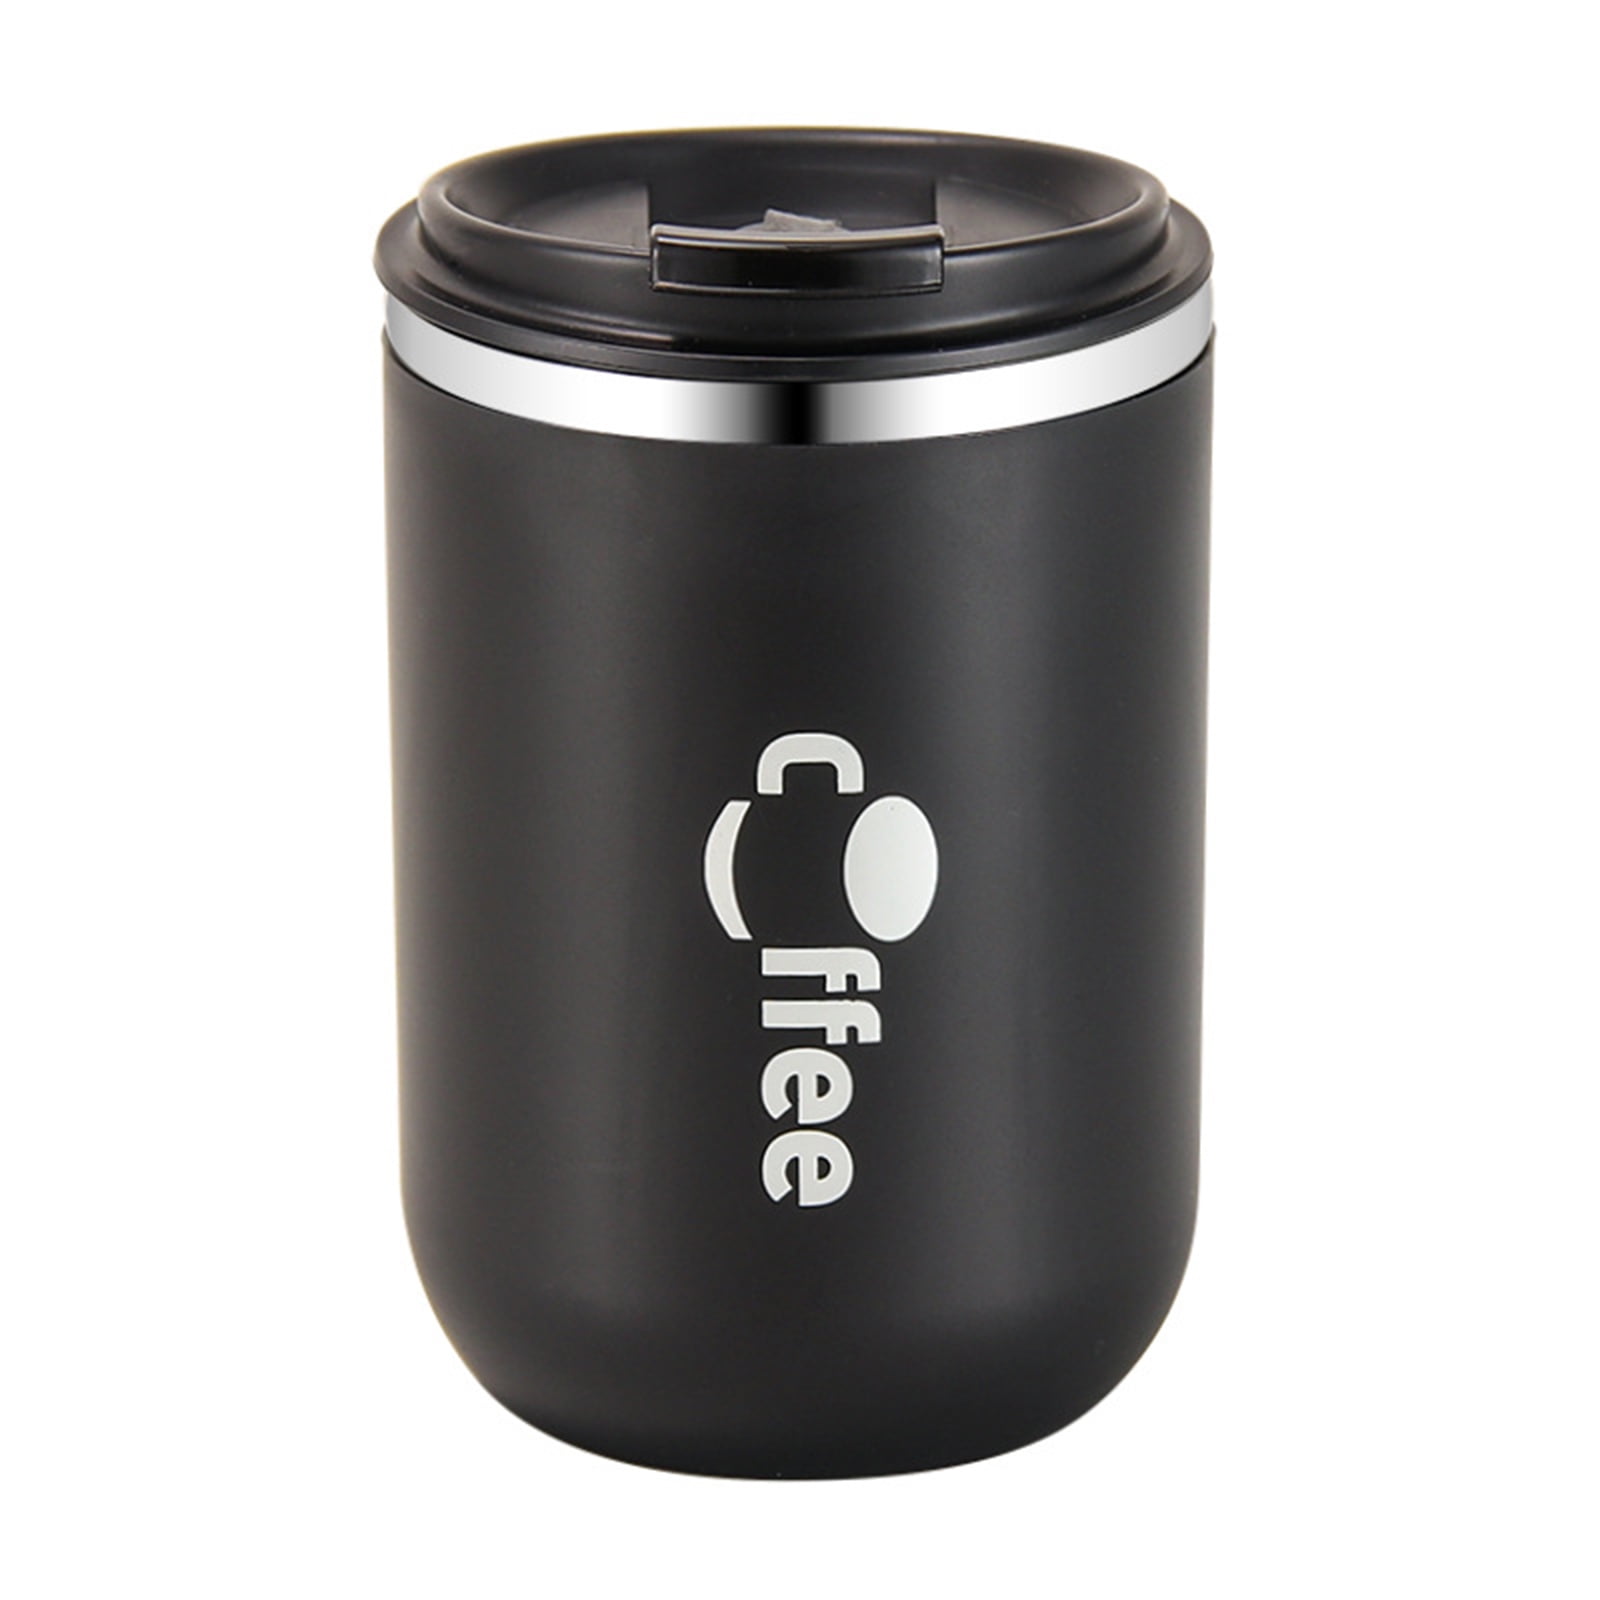 17oz Stainless Steel Vacuum Insulated Coffee Travel Mug for Ice Drink & Hot  Beverage, Double Wall Tr…See more 17oz Stainless Steel Vacuum Insulated